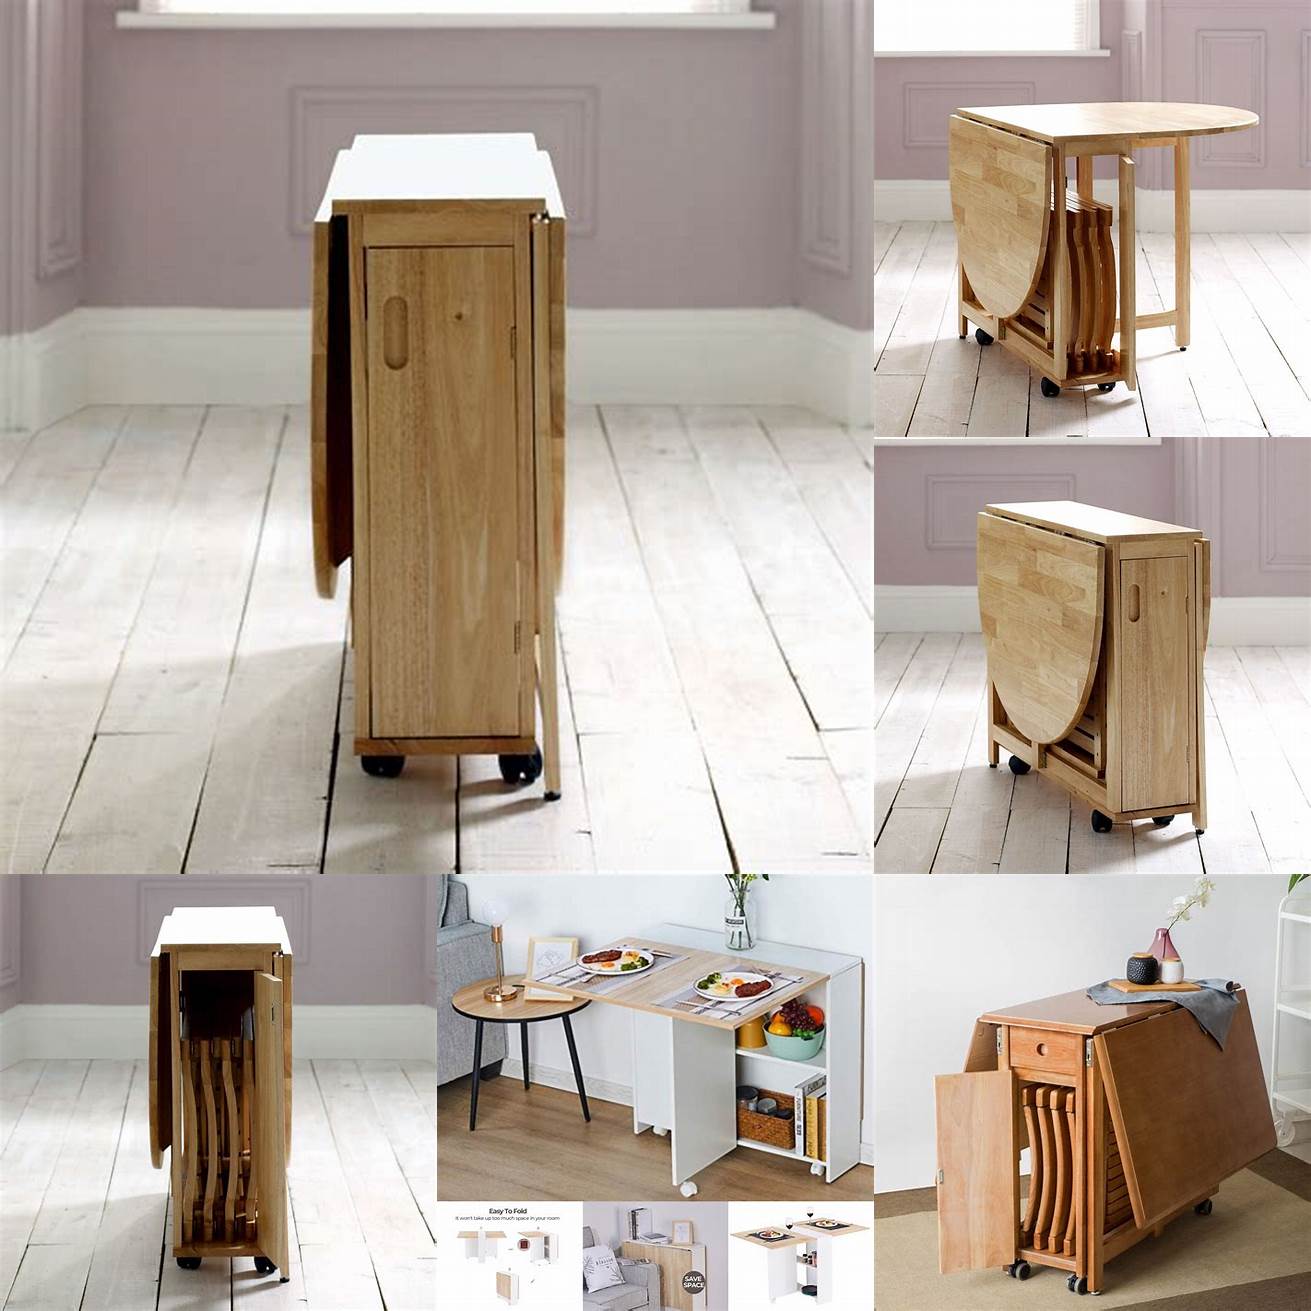 A folding table is perfect for small spaces as it can be easily stored when not in use